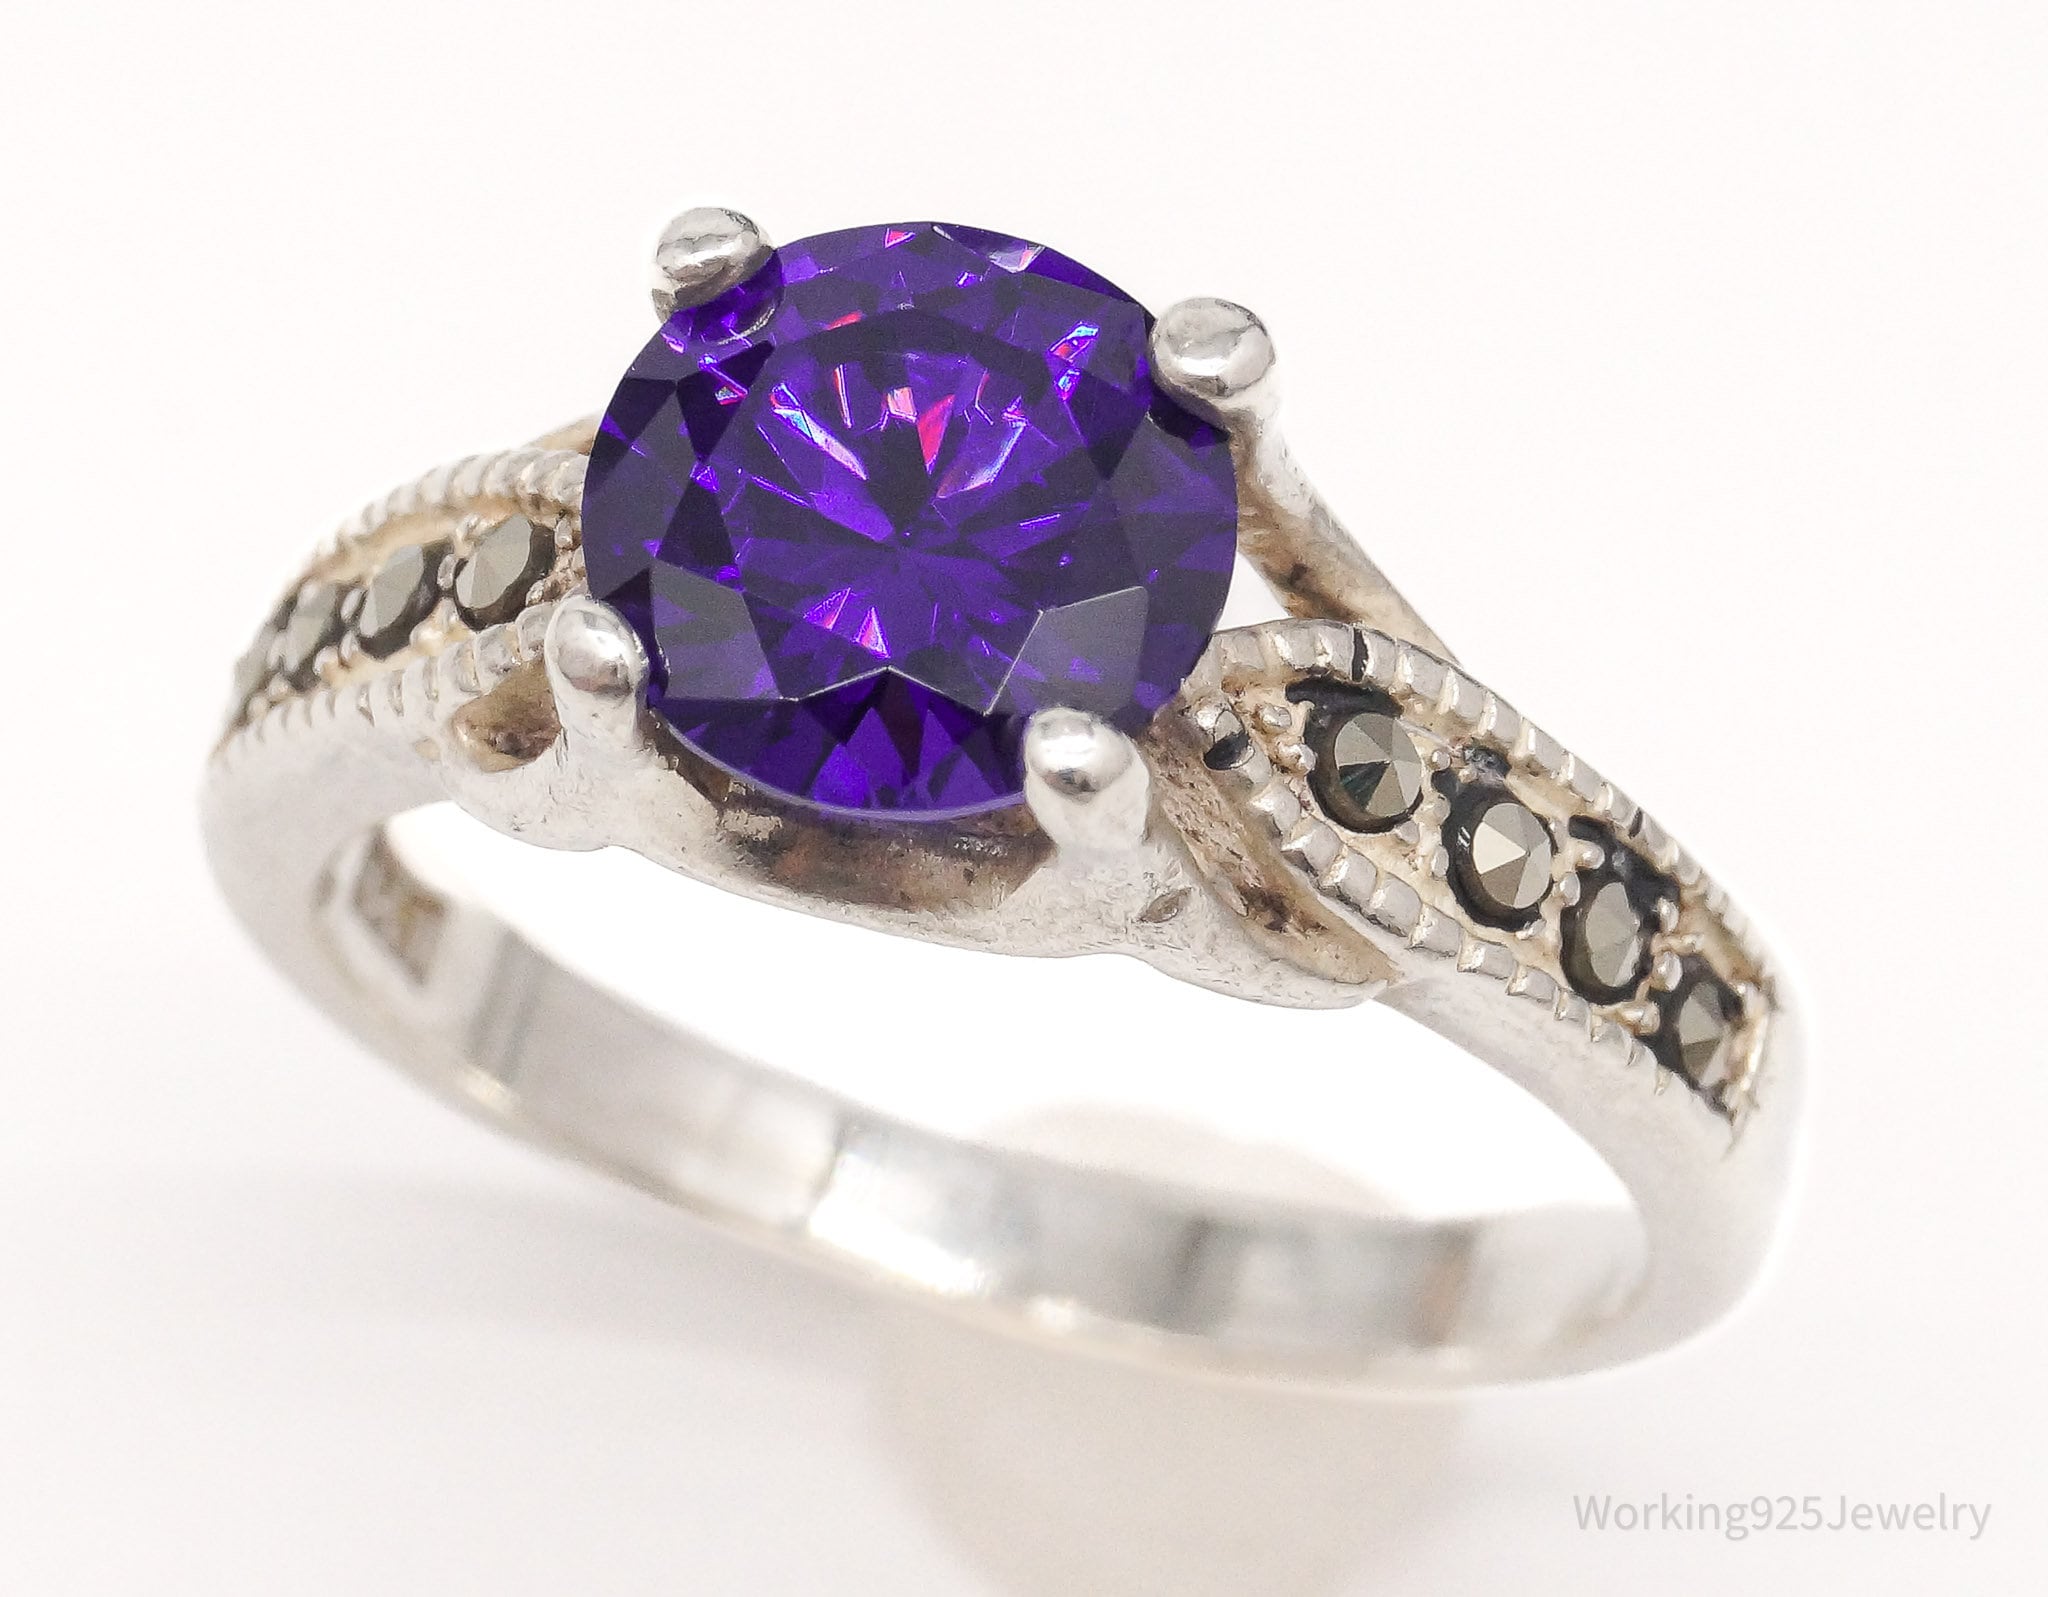 Vintage Purple Cubic Zirconia Marcasite Sterling Silver Ring - Size 8